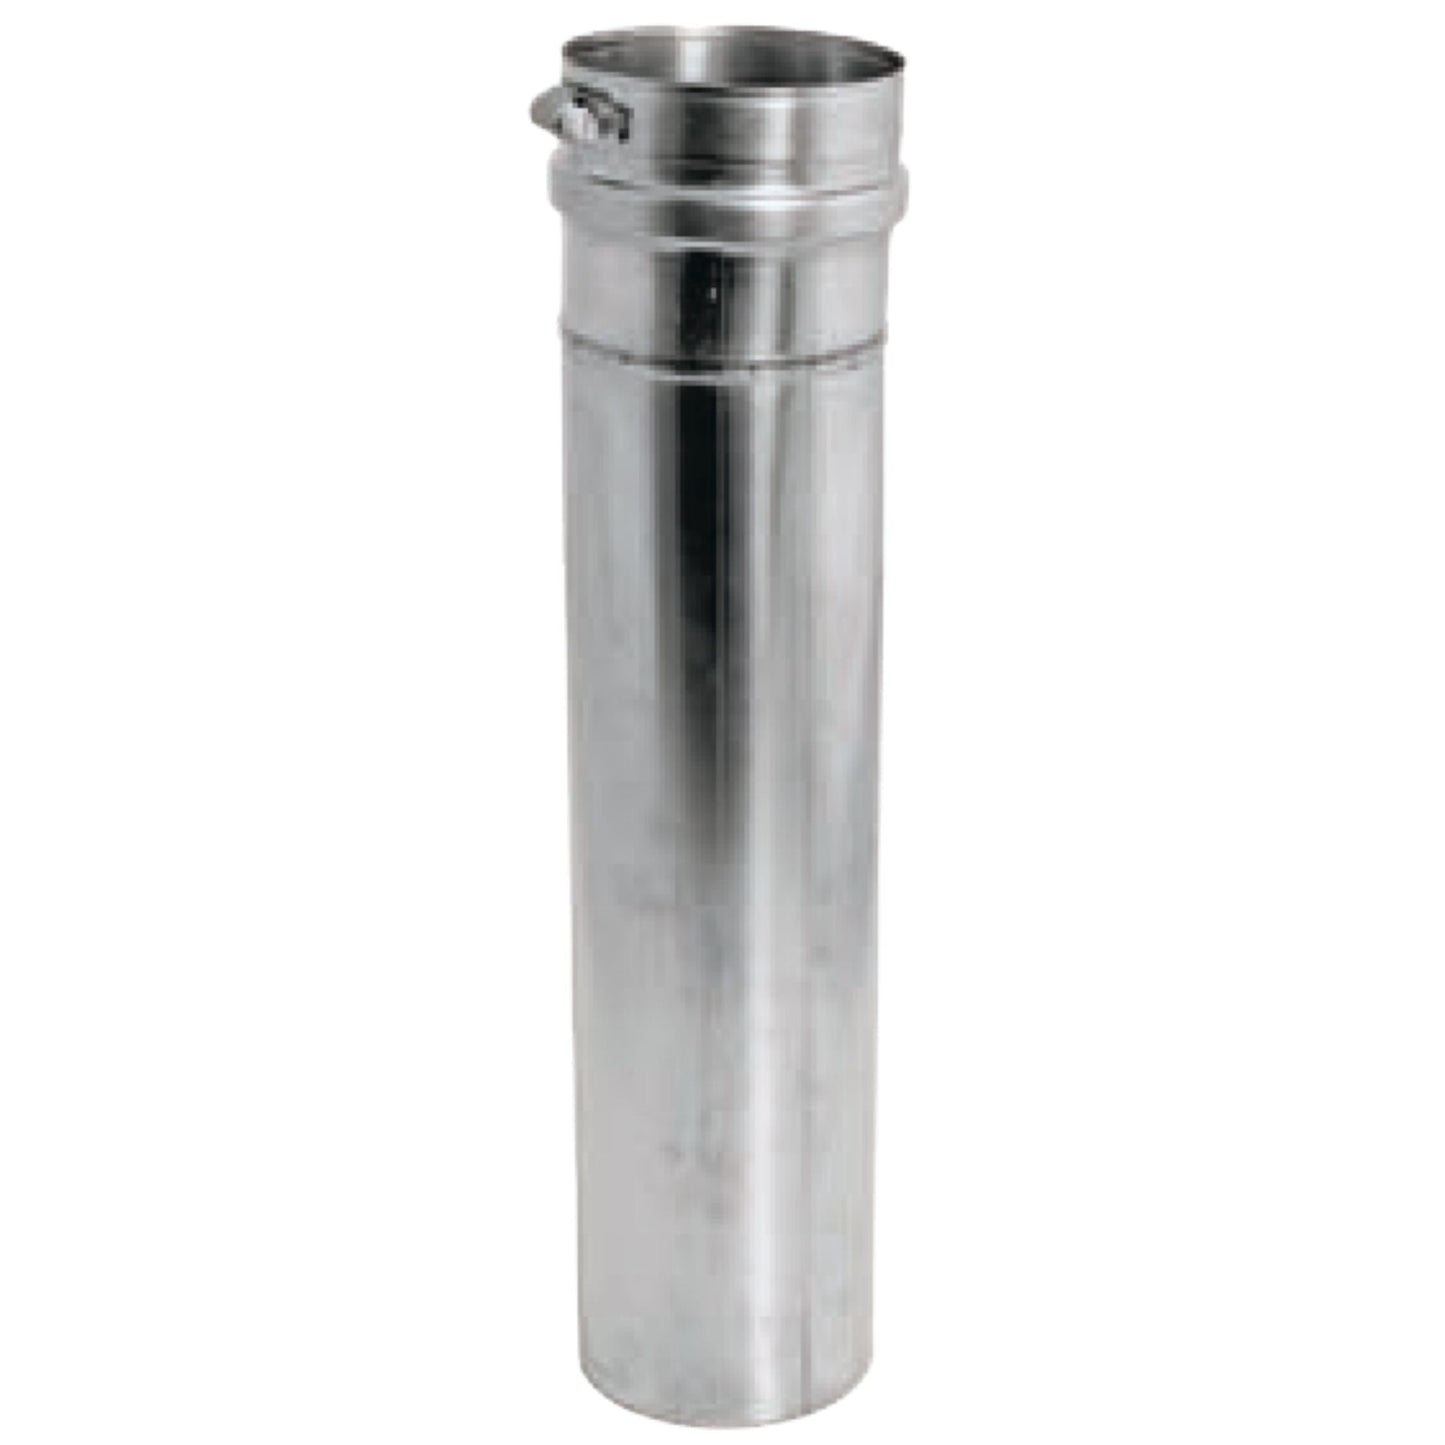 DuraVent FasNSeal 4" 2 Degree 316L Stainless Steel Adjustable Vent Length